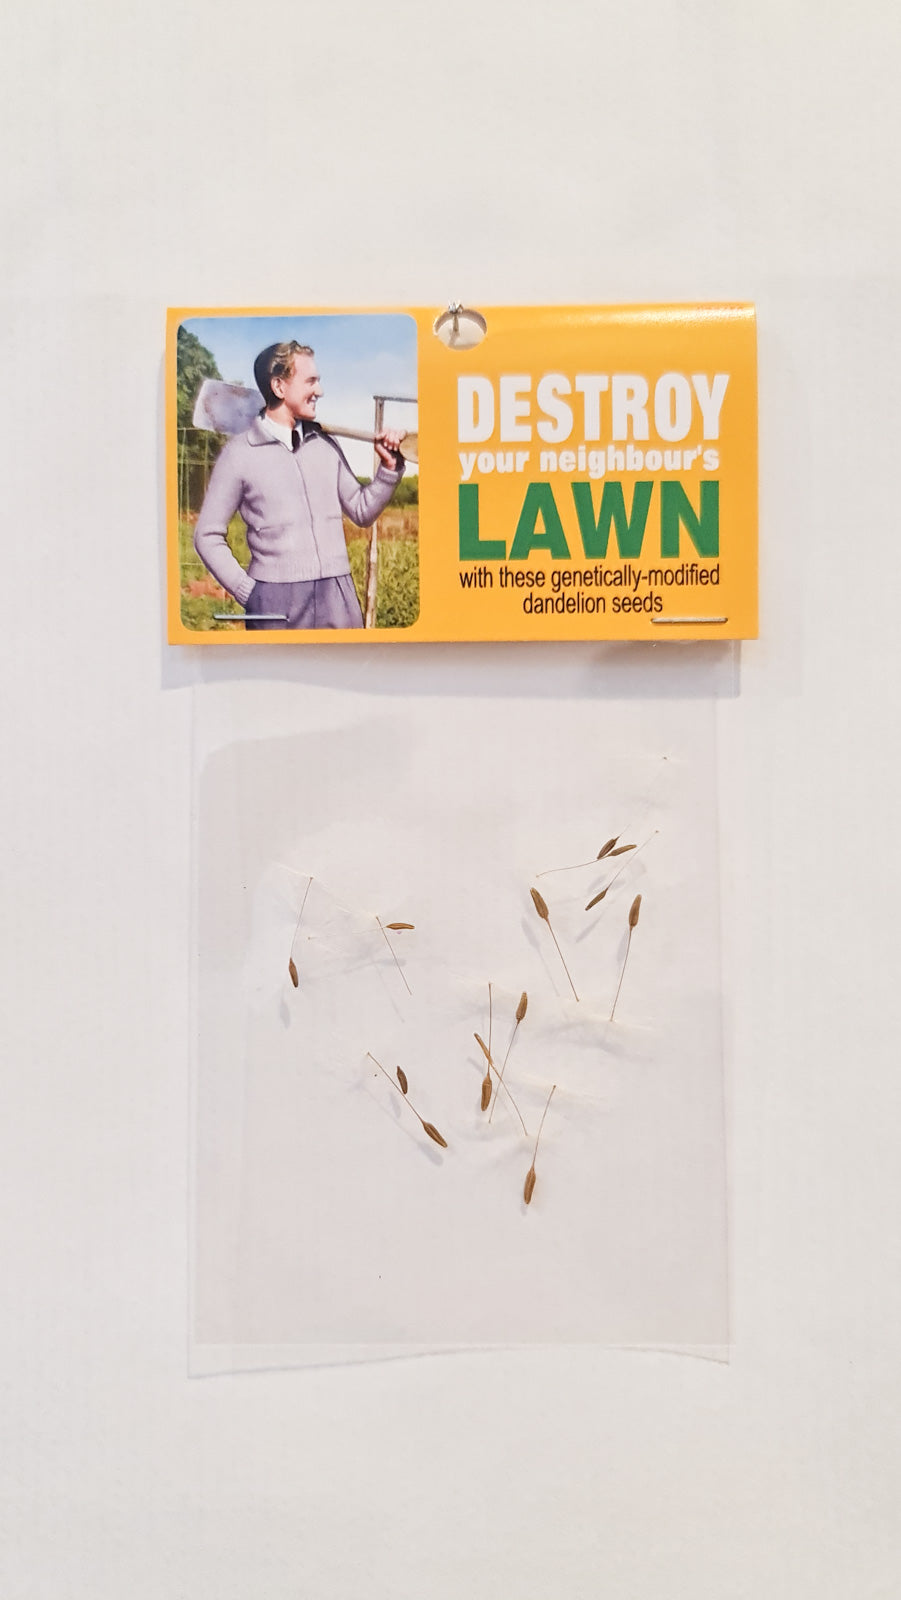 DESTROY YOUR NEIGHBOUR'S LAWN, 2020